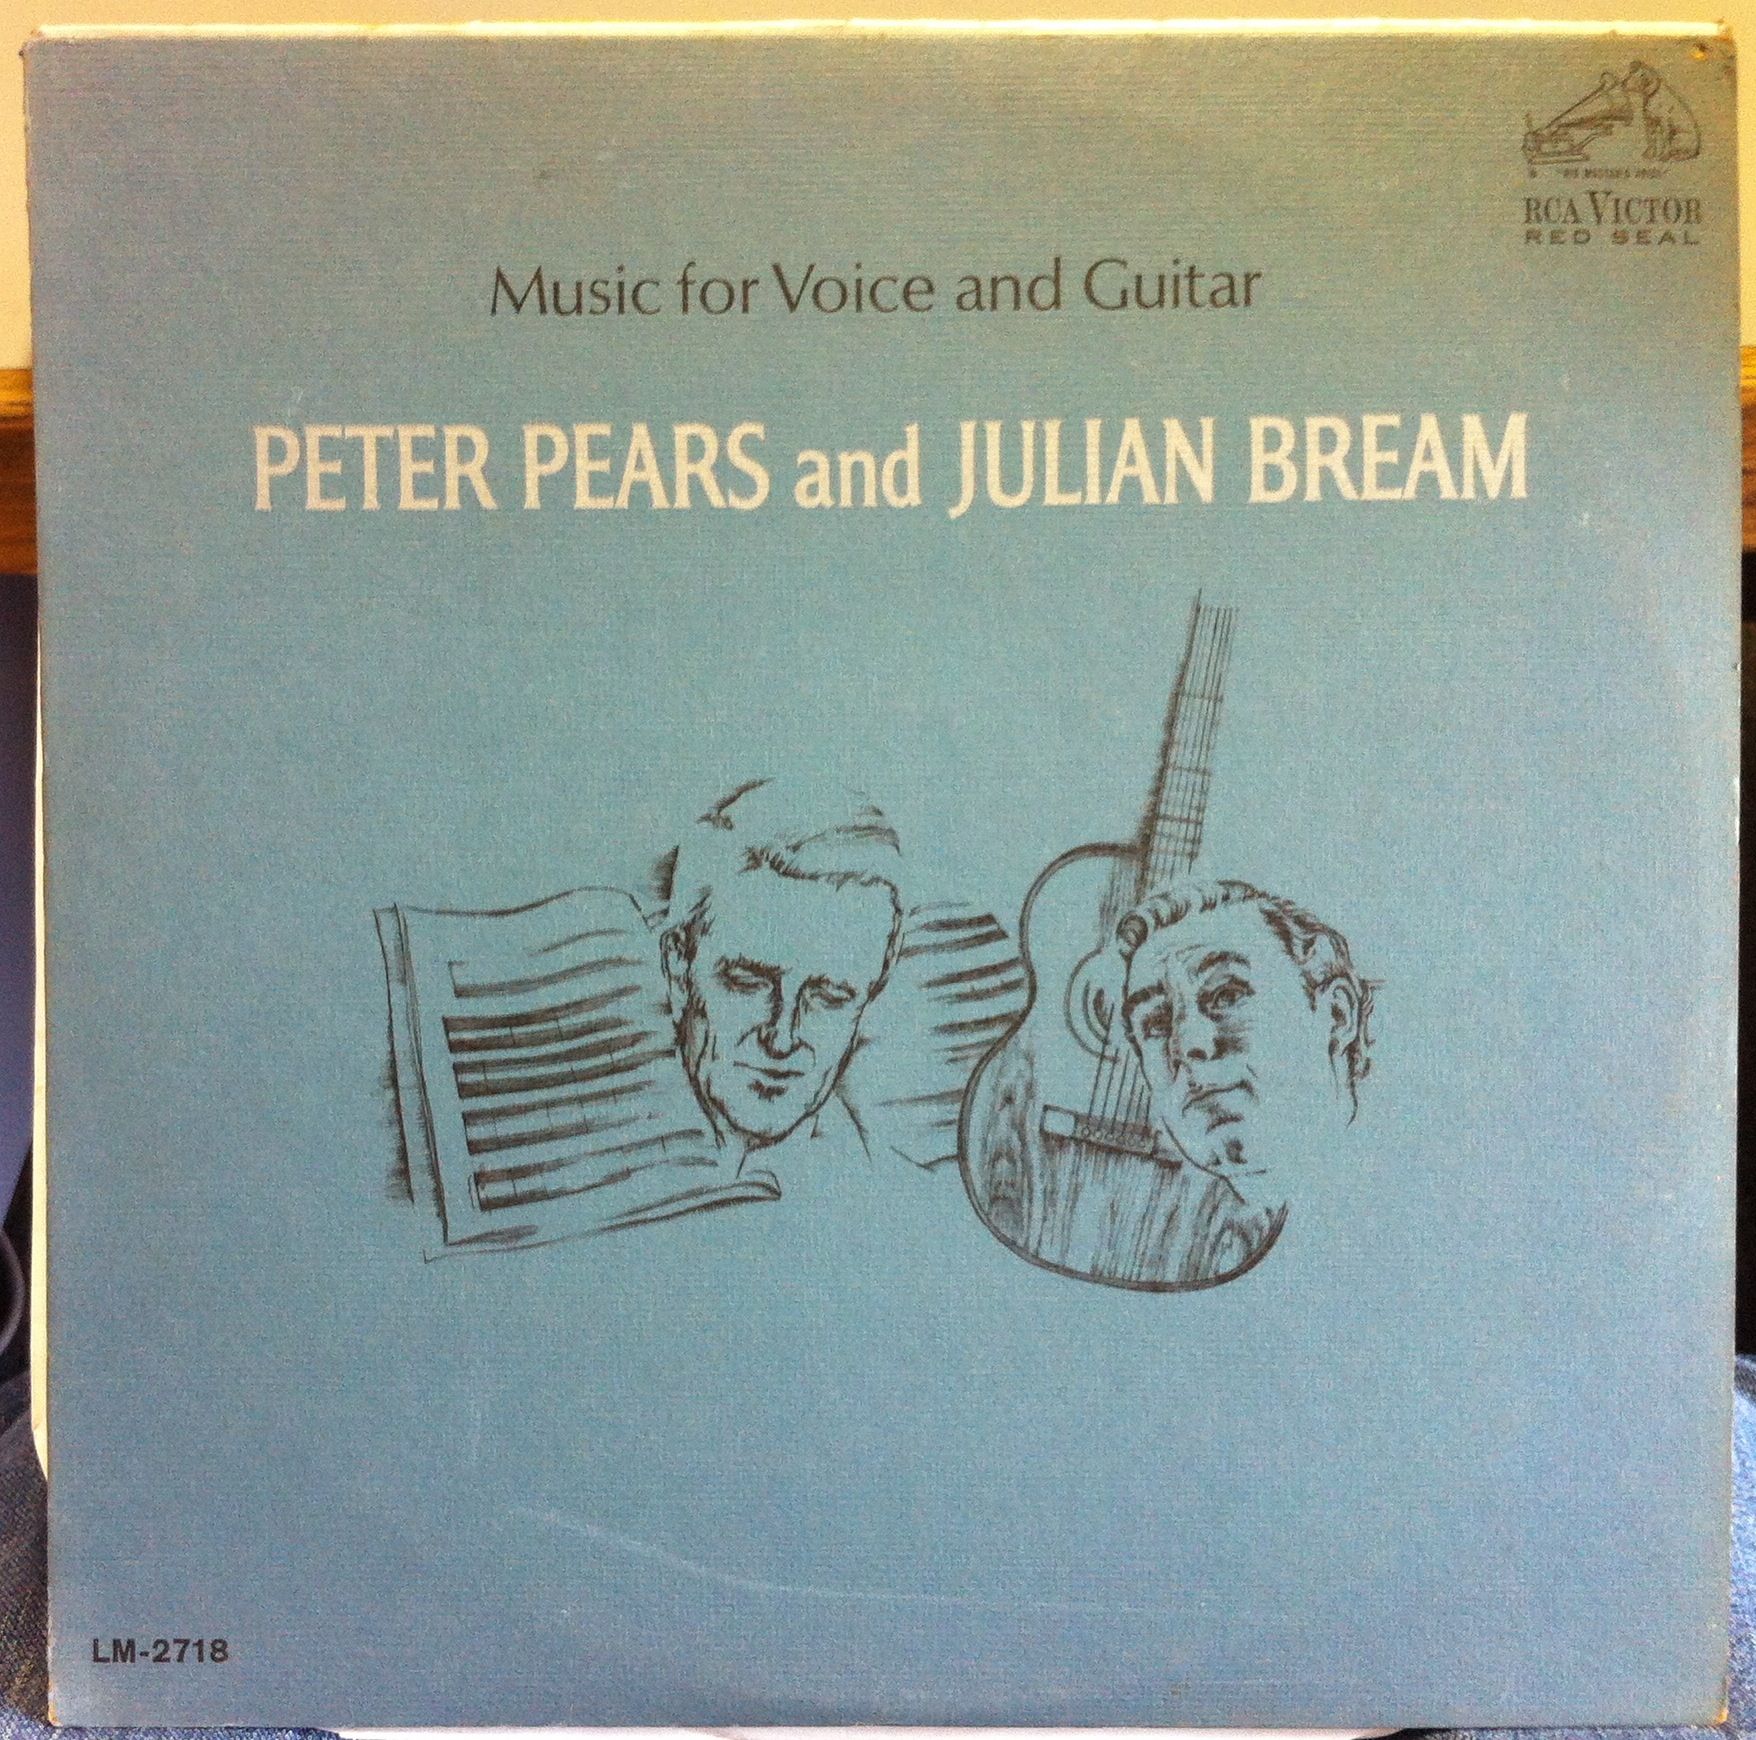 1s/1s WD PETER PEARS & JULIAN BREAM music for voice and guitar LP Mint